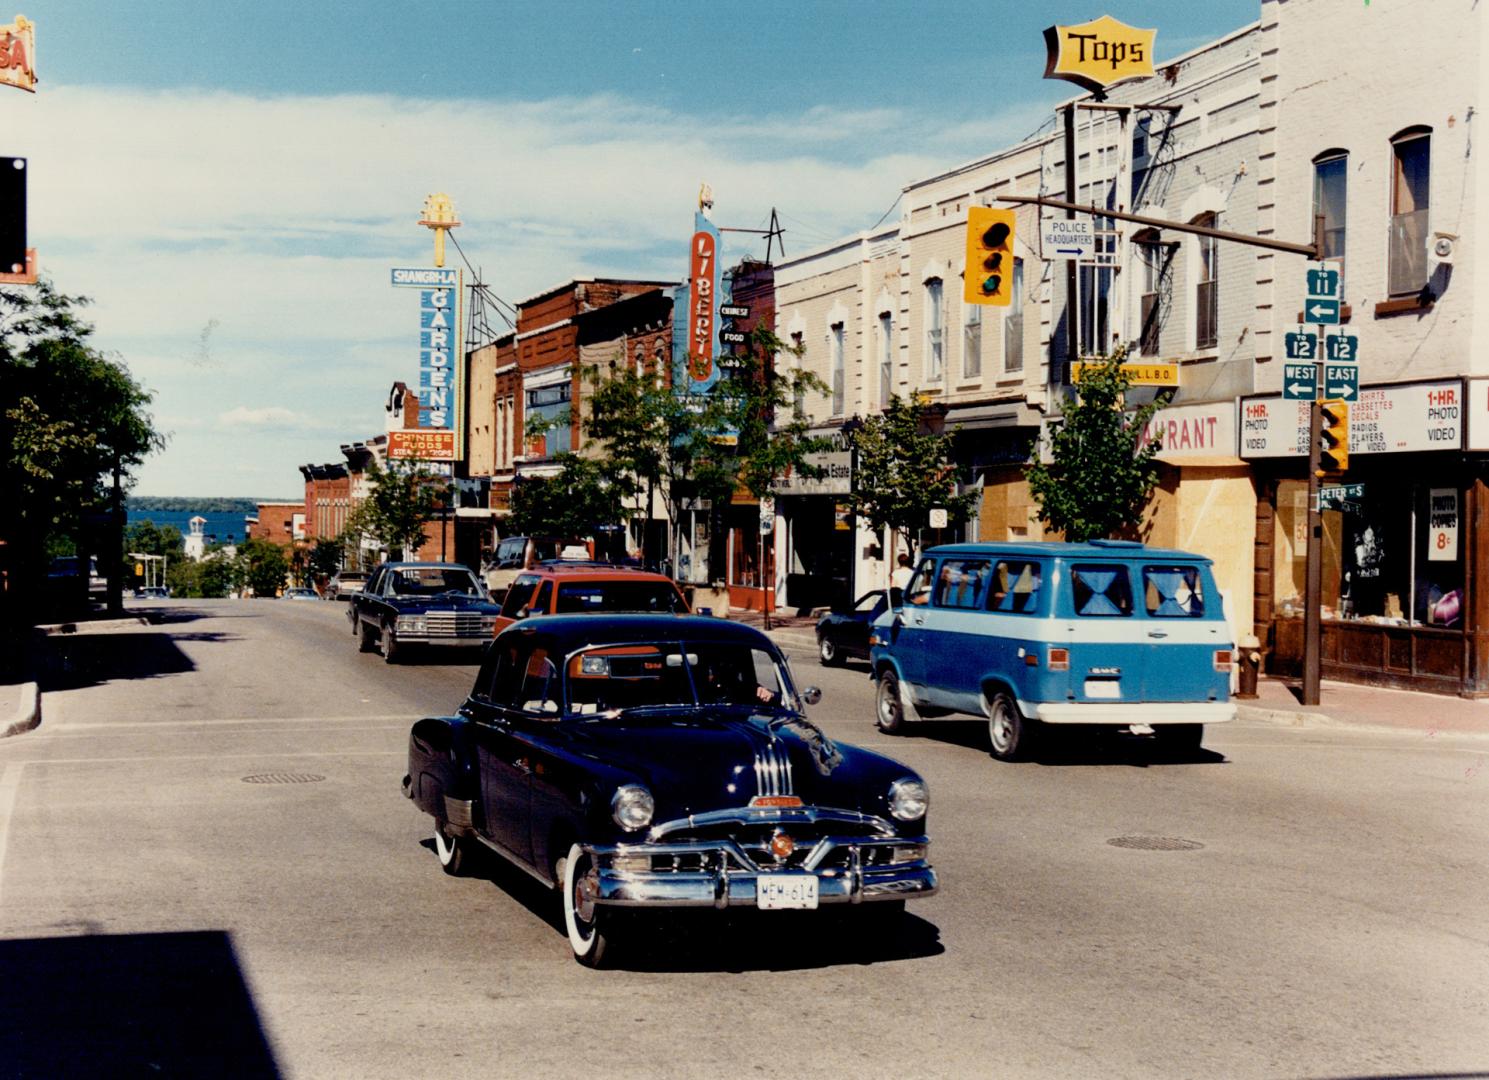 Orillia is proud of its many famous sons and its ability to keep intact its small town charm